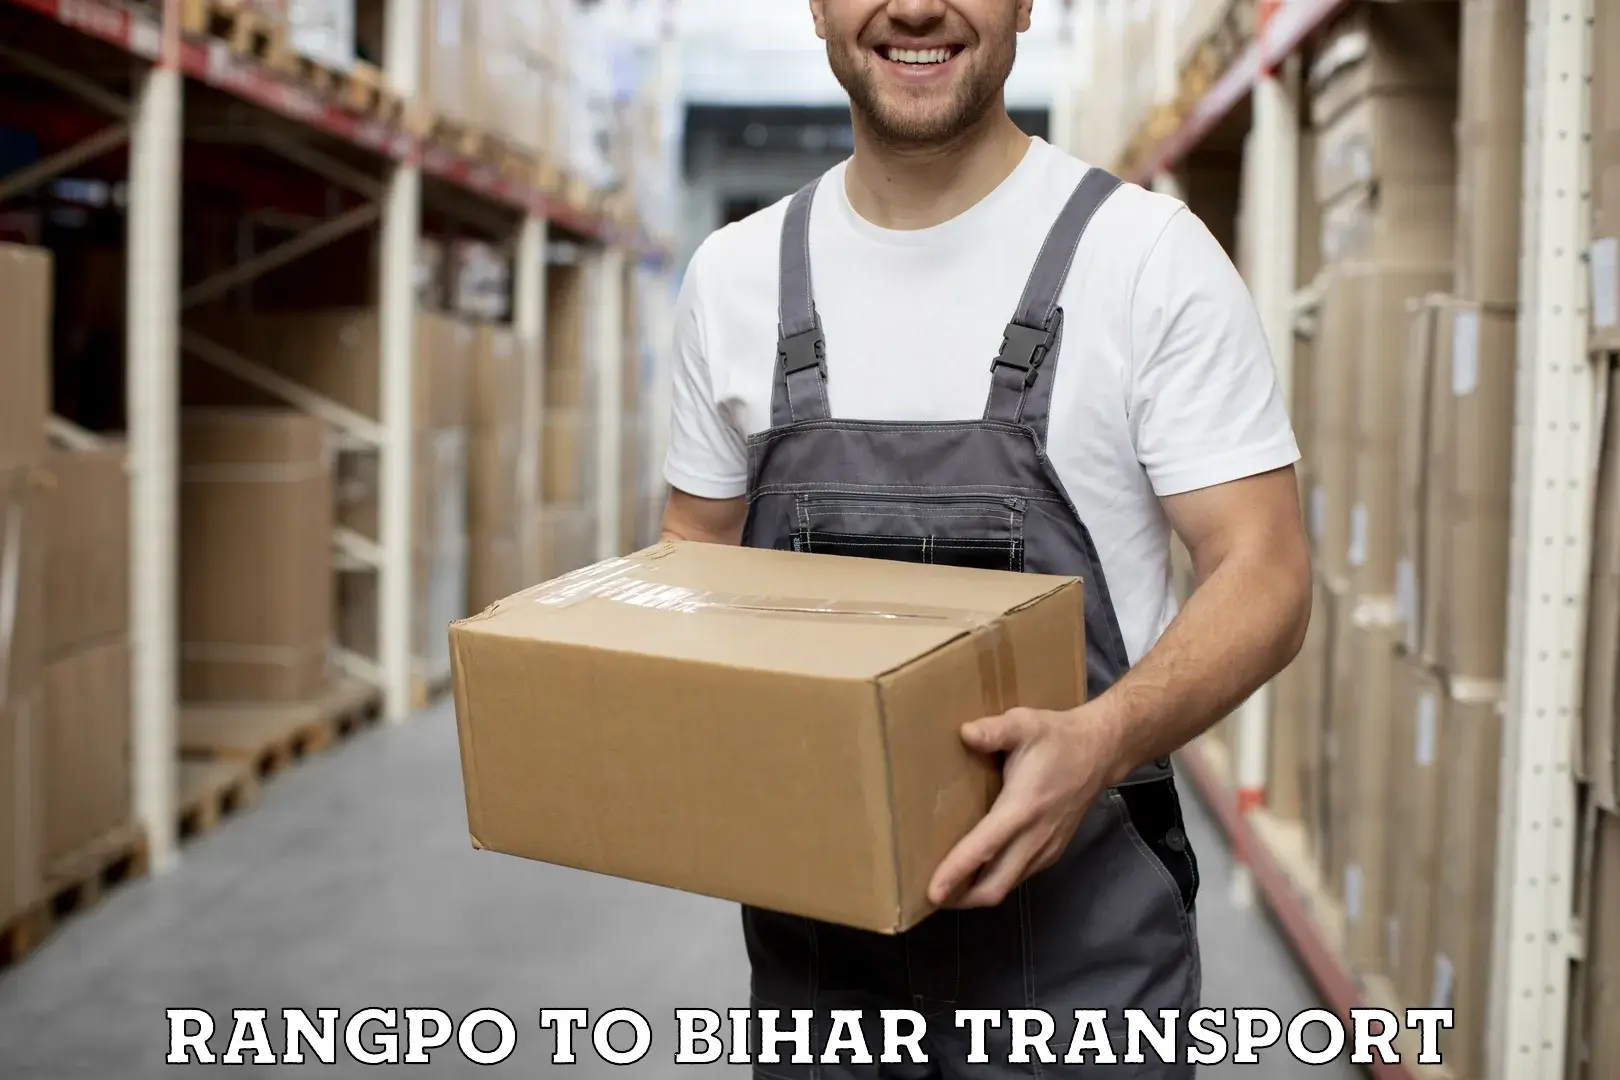 Air freight transport services Rangpo to Bhorey